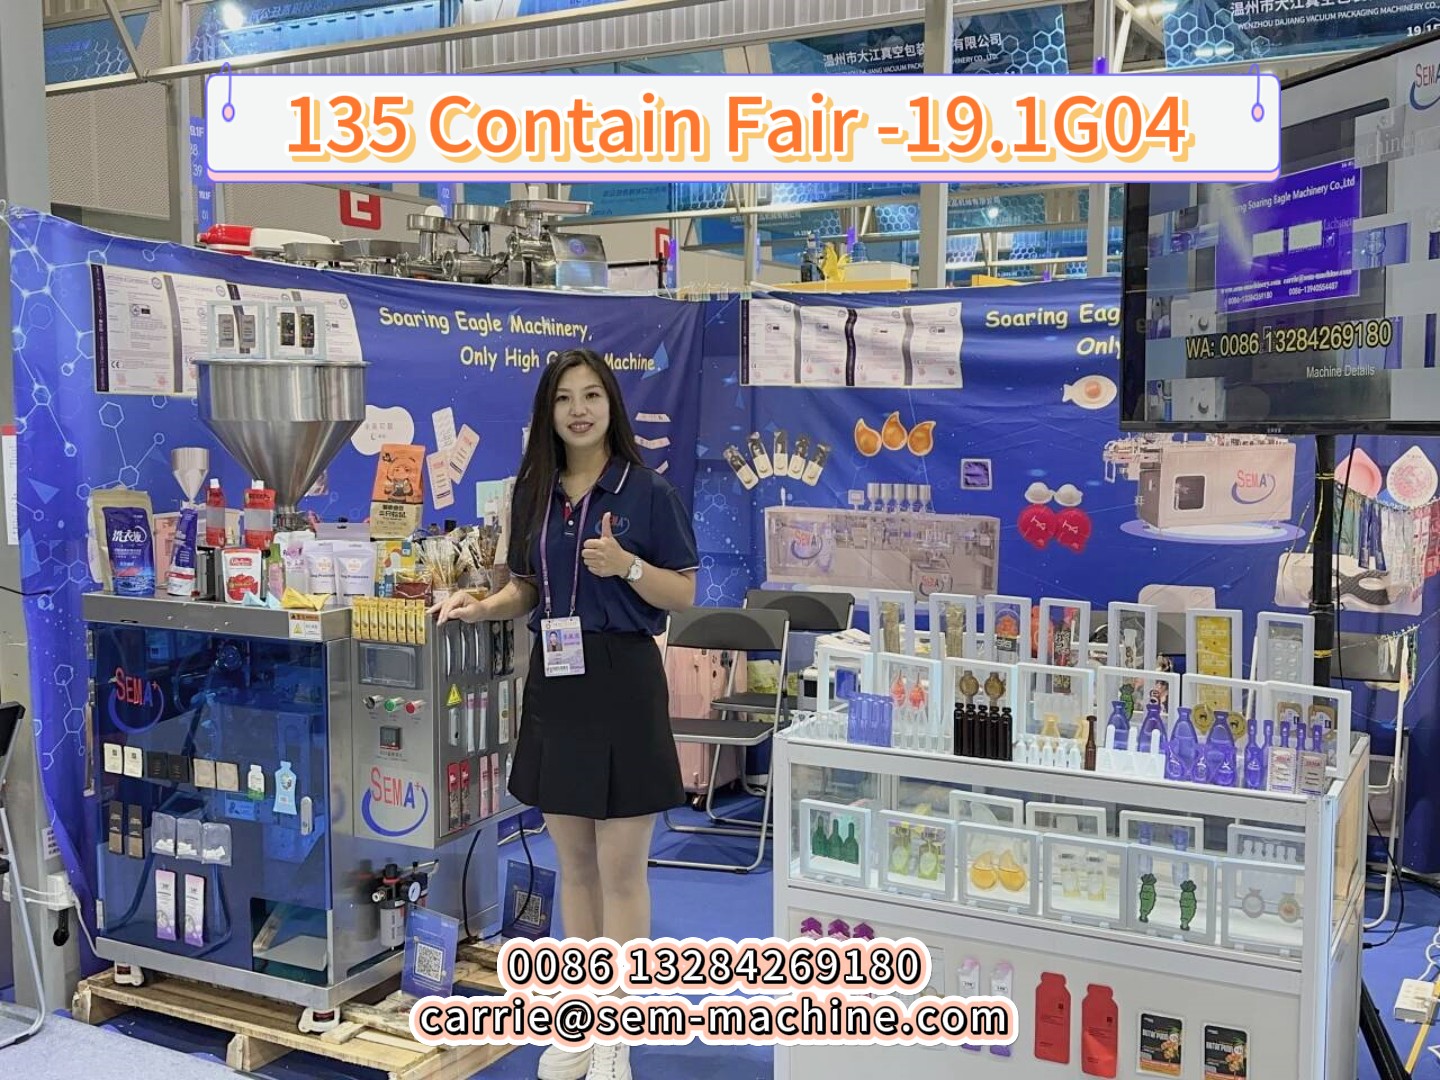 135 Canton Fair - 19.1G04, Warm welcome to our booth